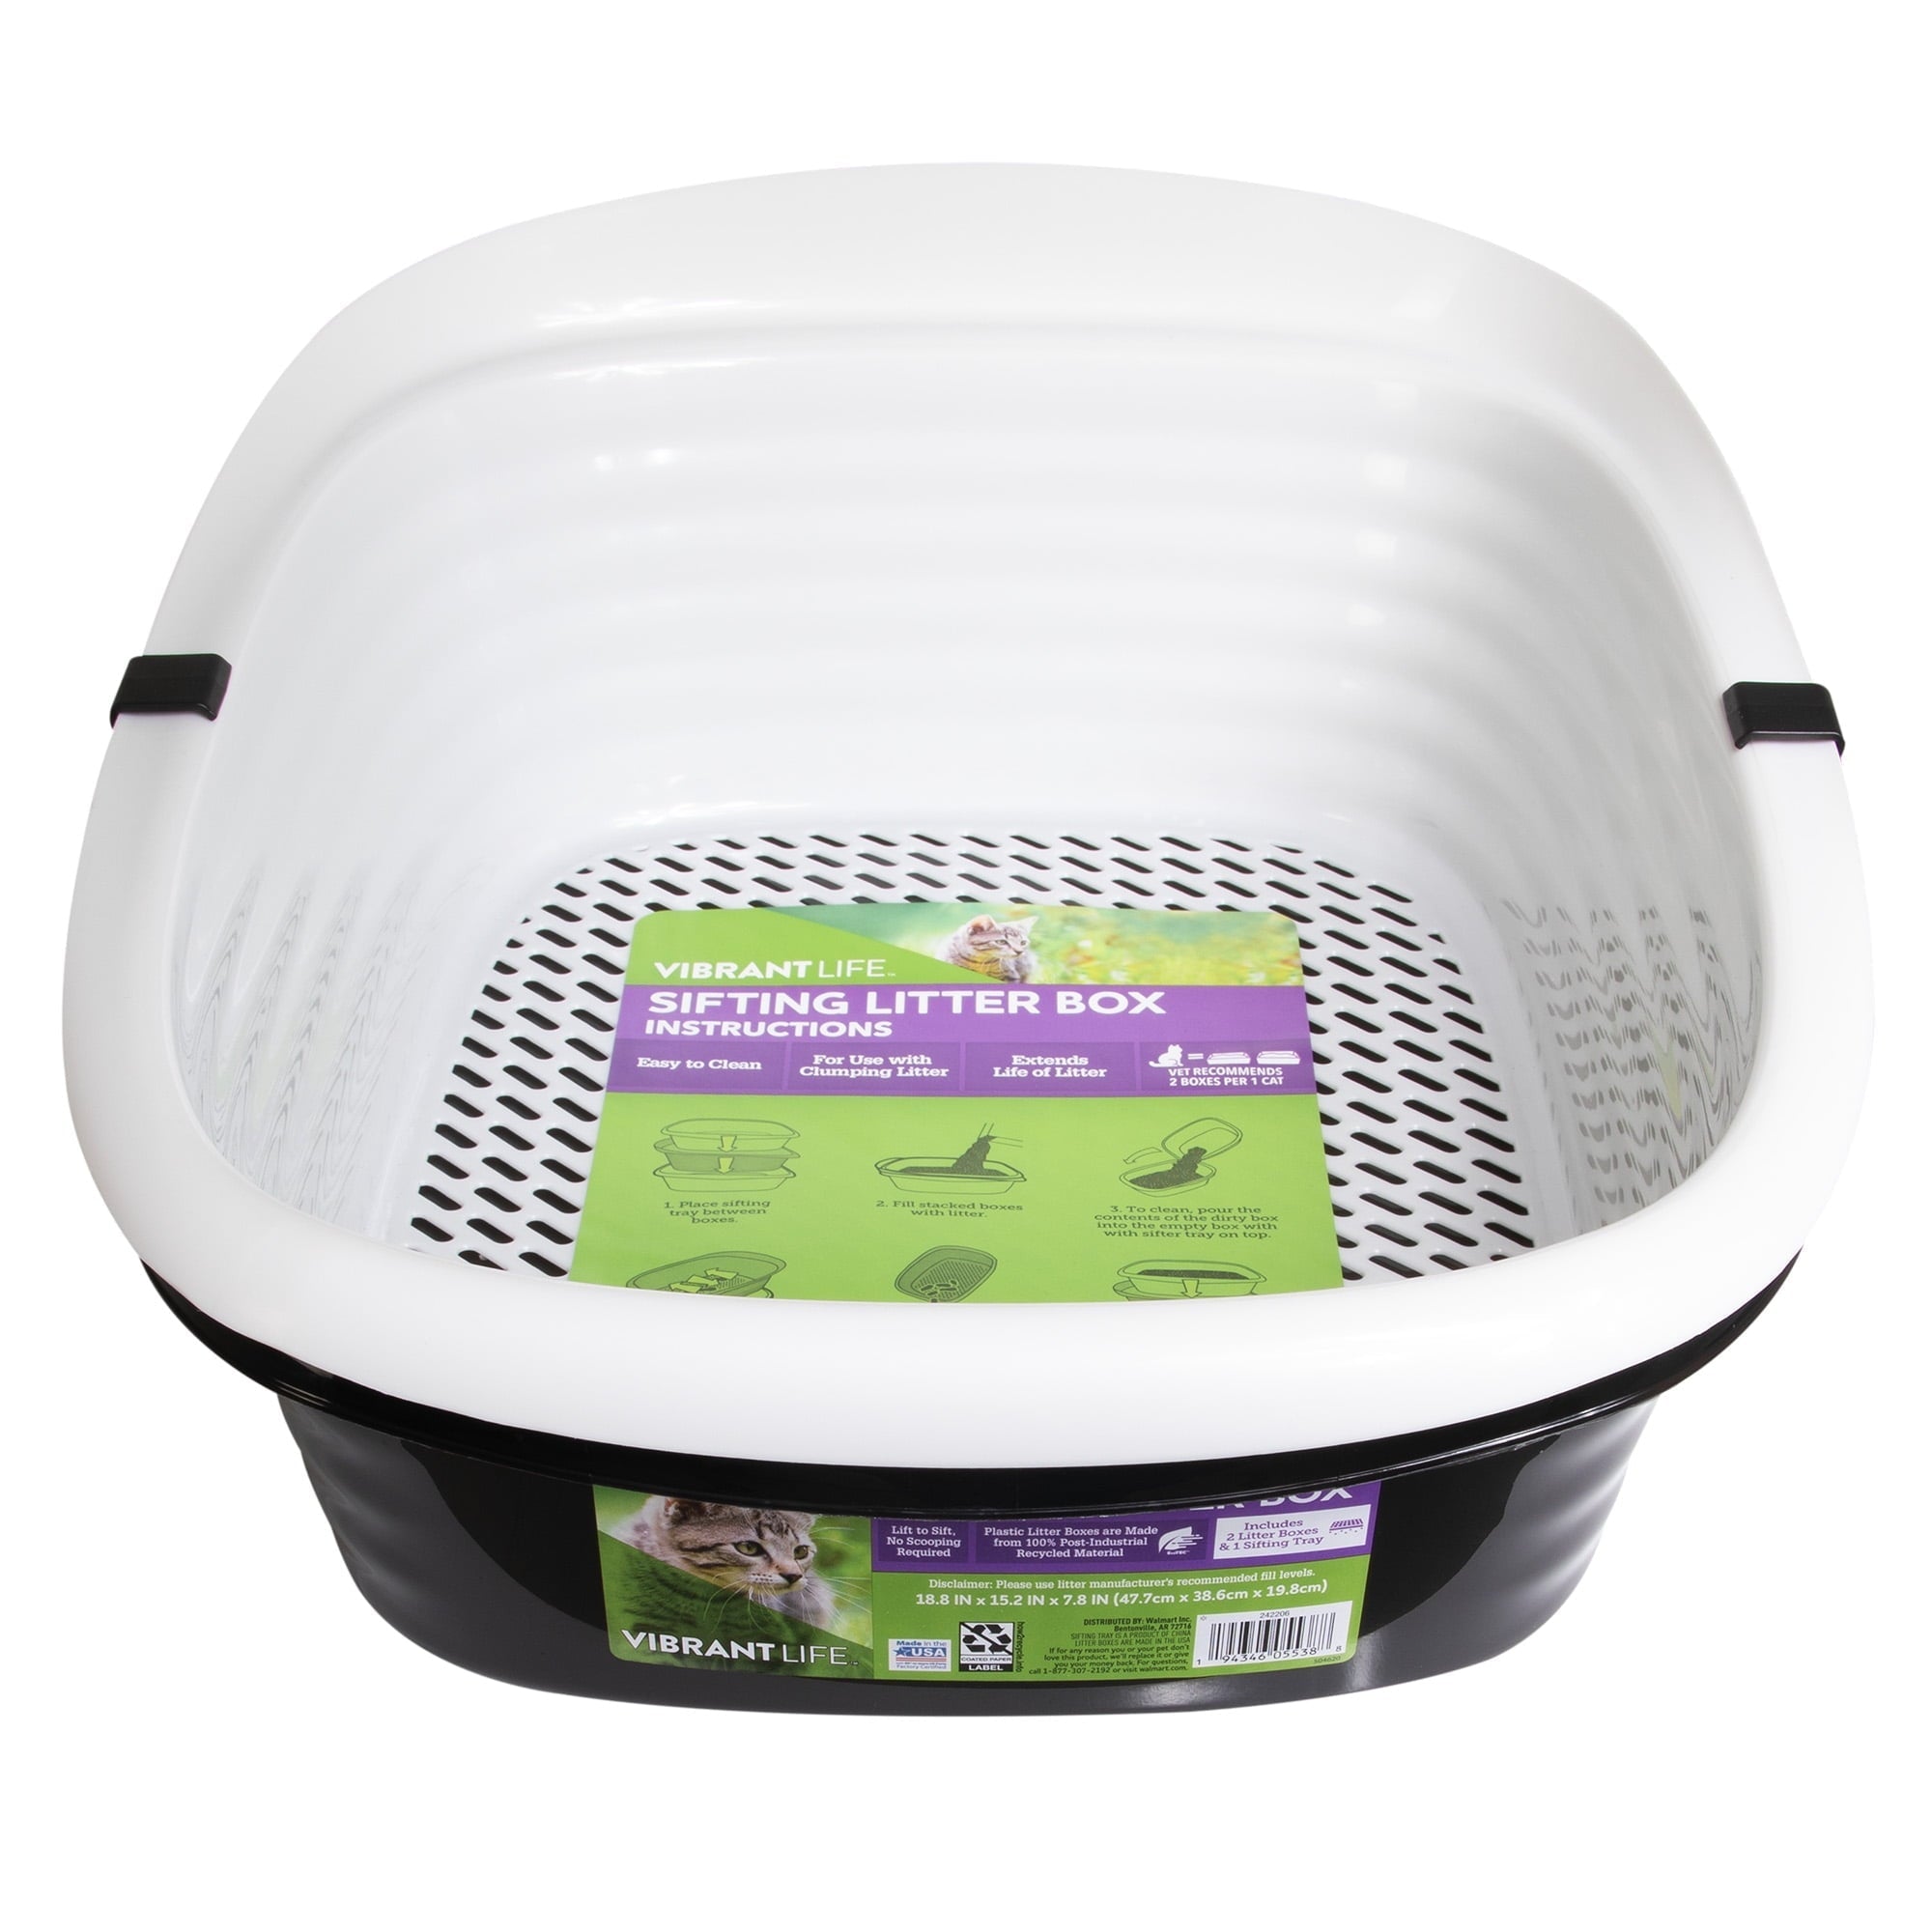 Wholesale prices with free shipping all over United States Vibrant Life Sifting Cat Litter Box - Steven Deals